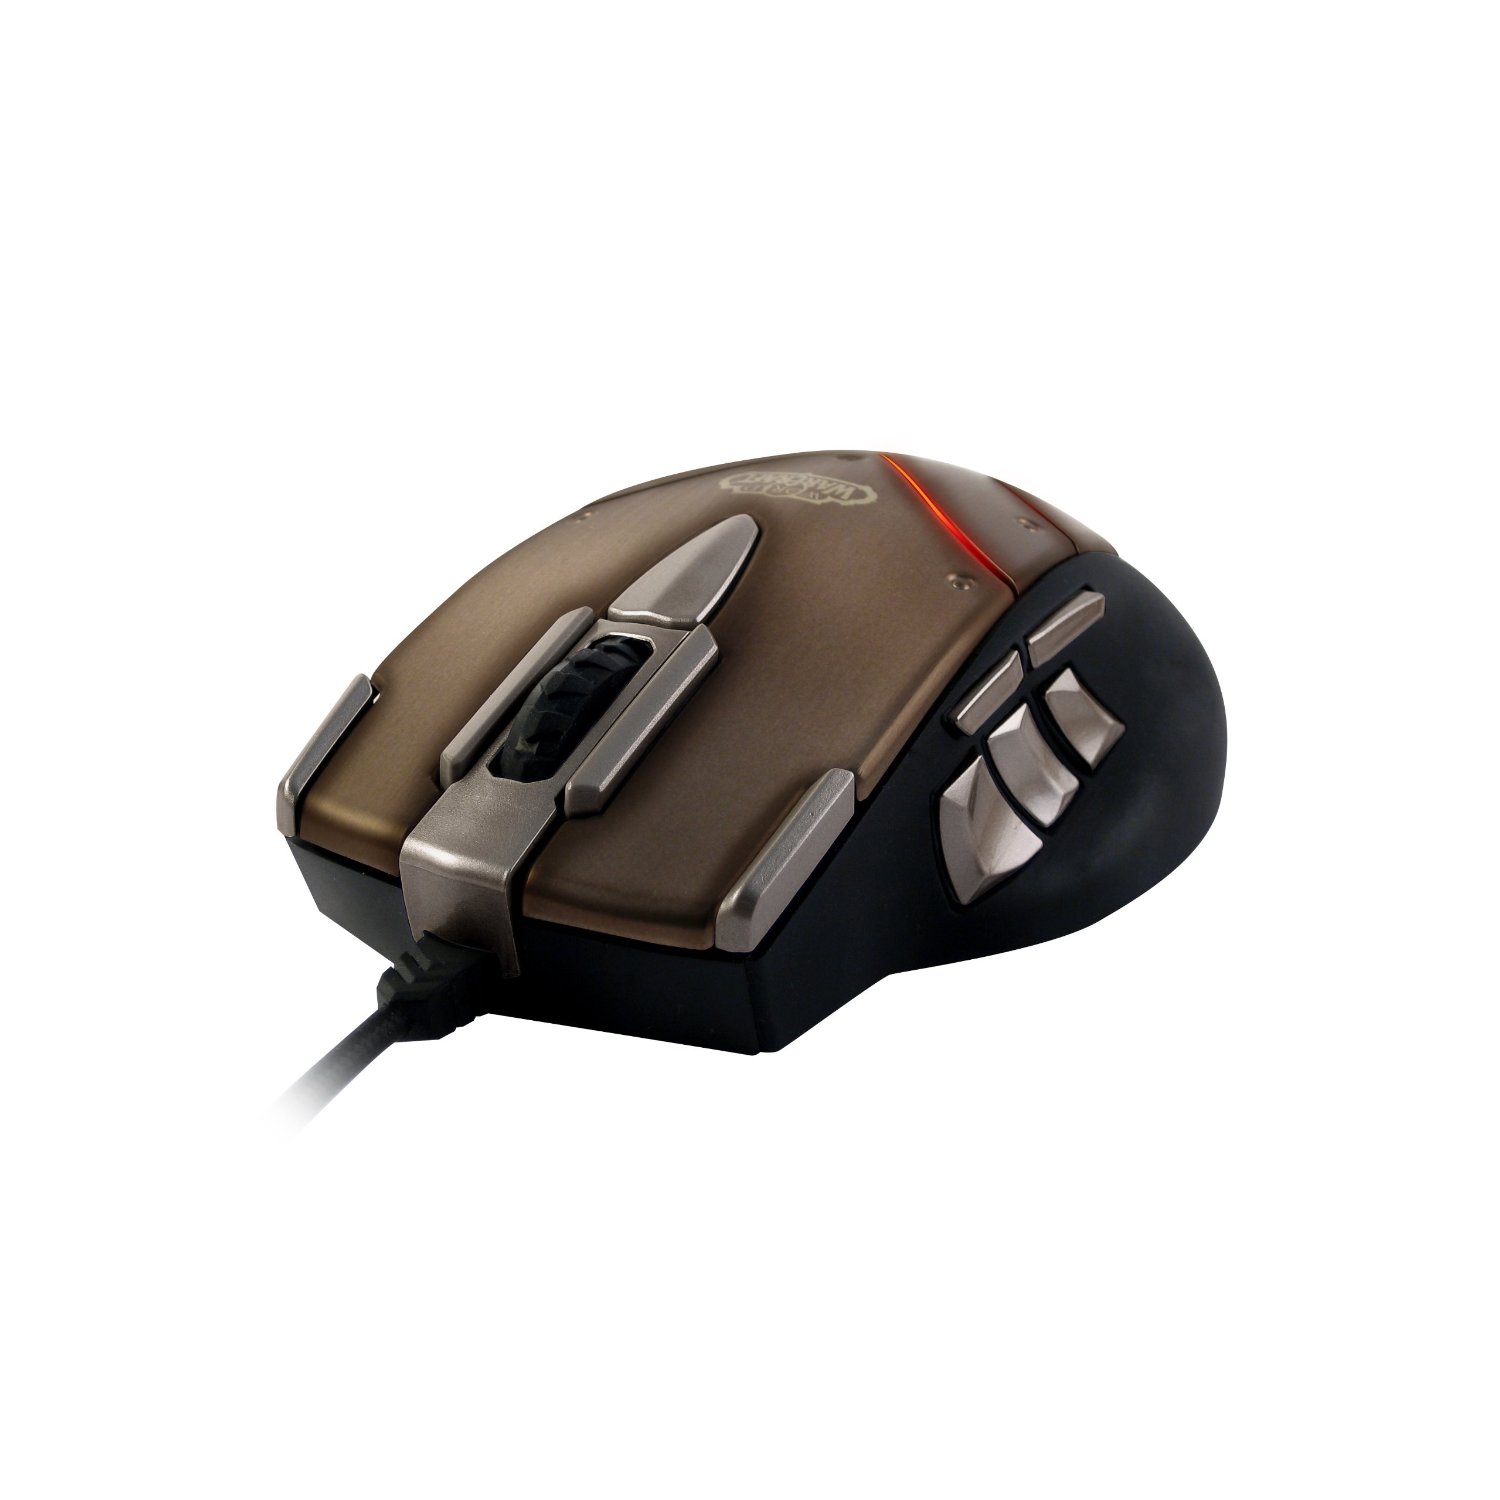 http://thetechjournal.com/wp-content/uploads/images/1202/1329465639-steelseries-world-of-warcraft-cataclysm-mmo-gaming-mouse-1.jpg